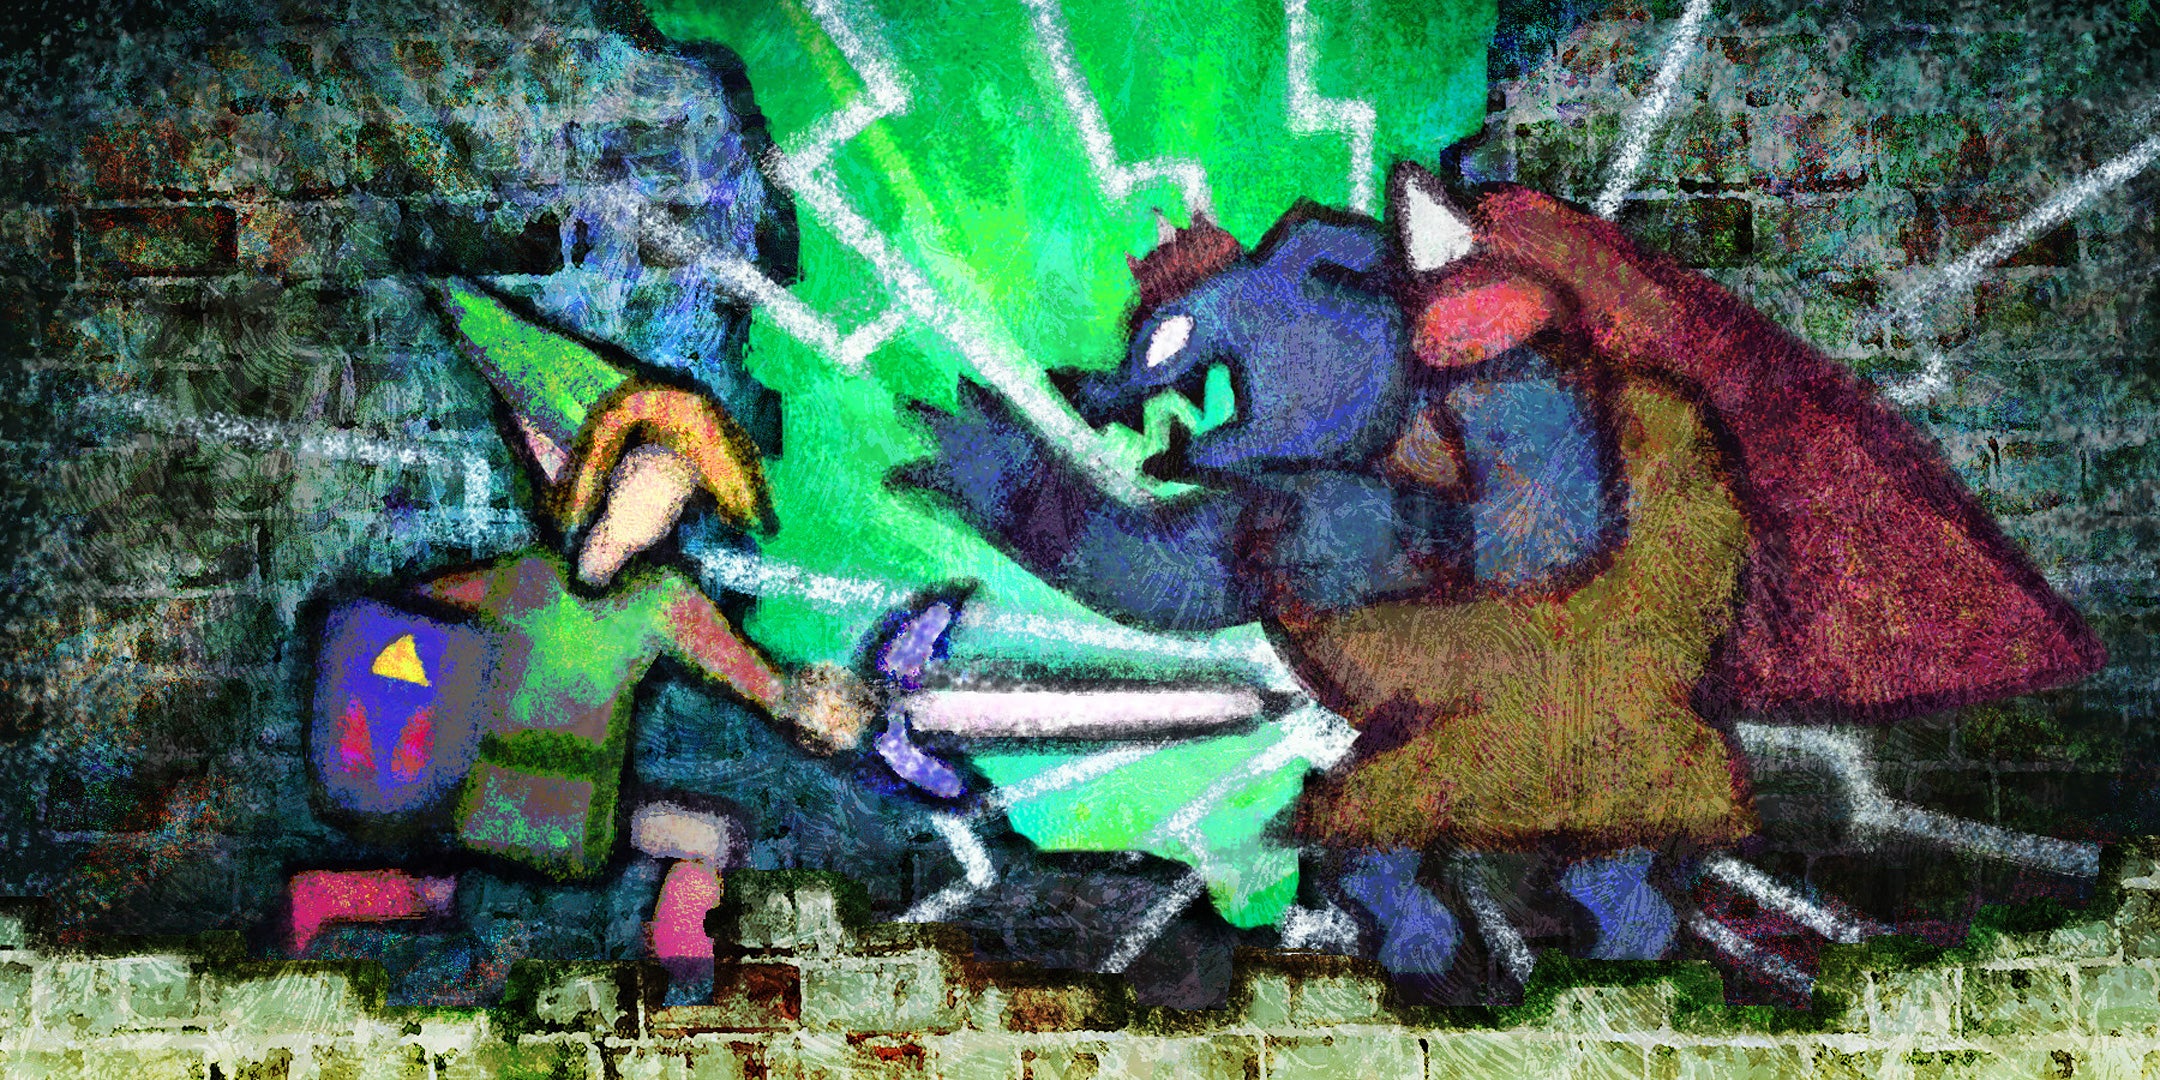 An illustration from the prologue of the game: Link from 'A Link to the Past' slays Ganon.